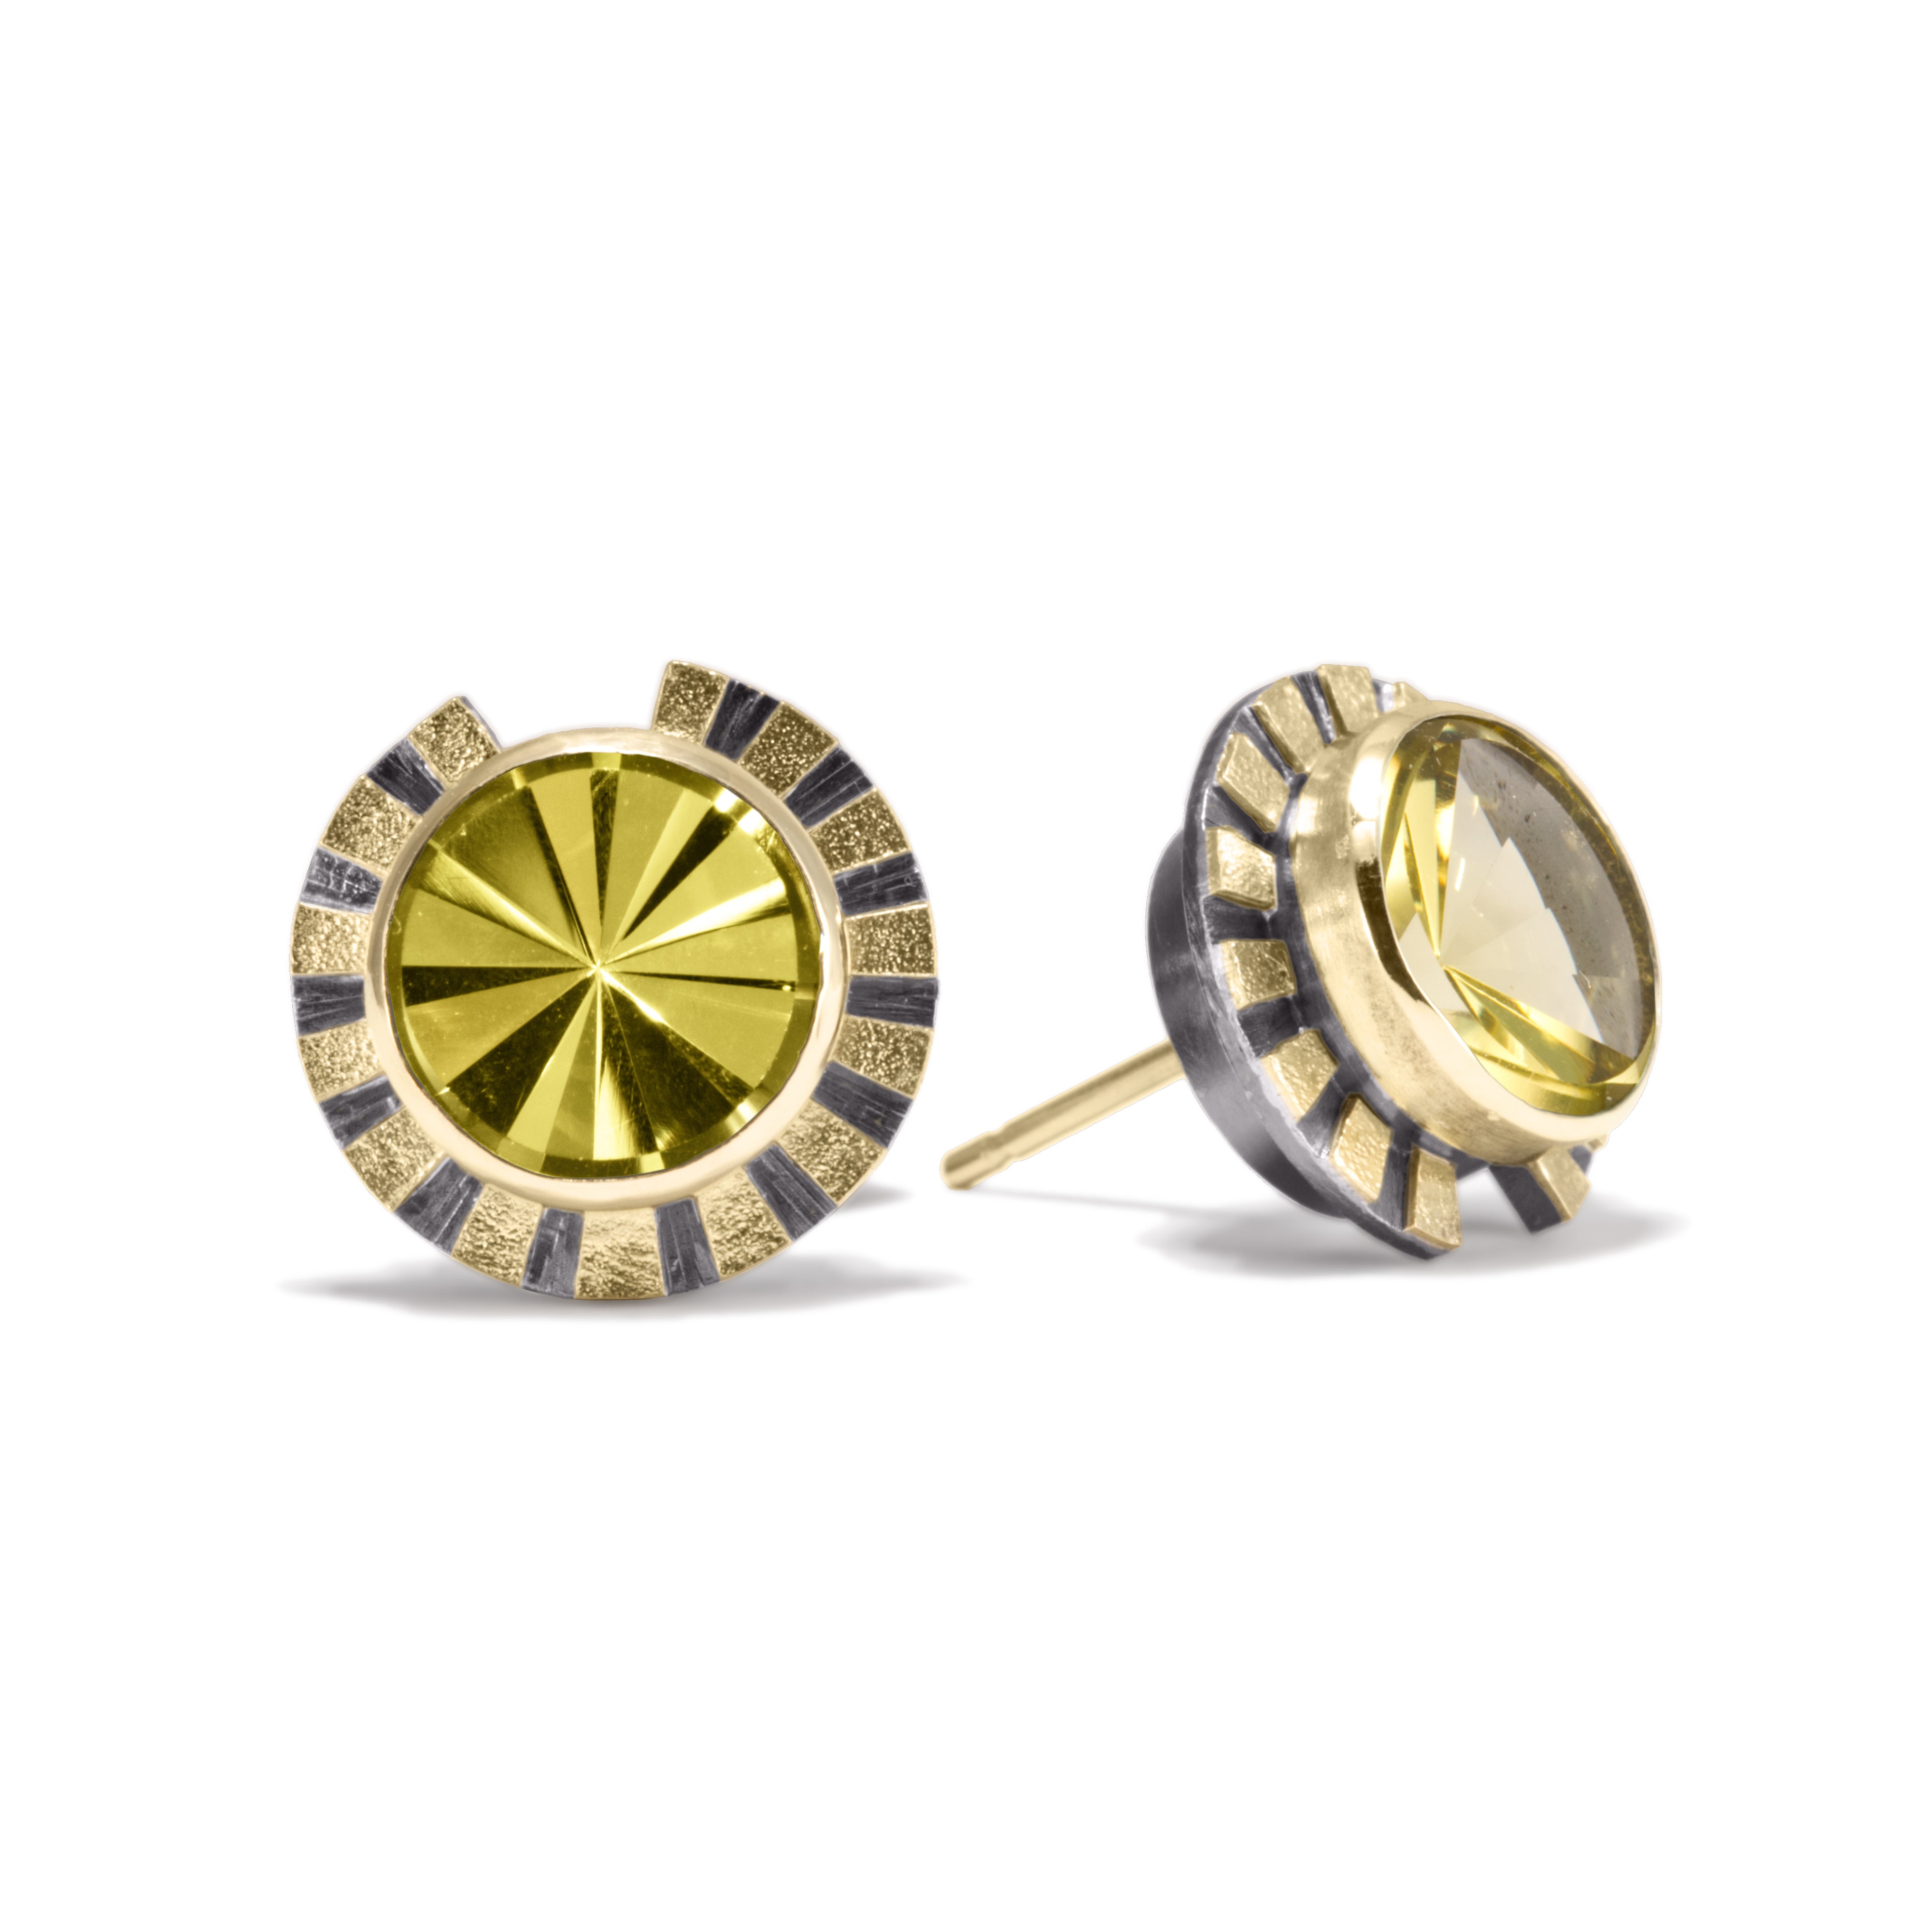 This is the refined and dazzling Striped Earring #1. Made in 18k gold and oxidized sterling silver, the design features a bezel set, radial cut, semiprecious center stone. Hand fabricated, stipple textured and engraved mixed metals.  Available in seven color ways, with 14k gold posts.